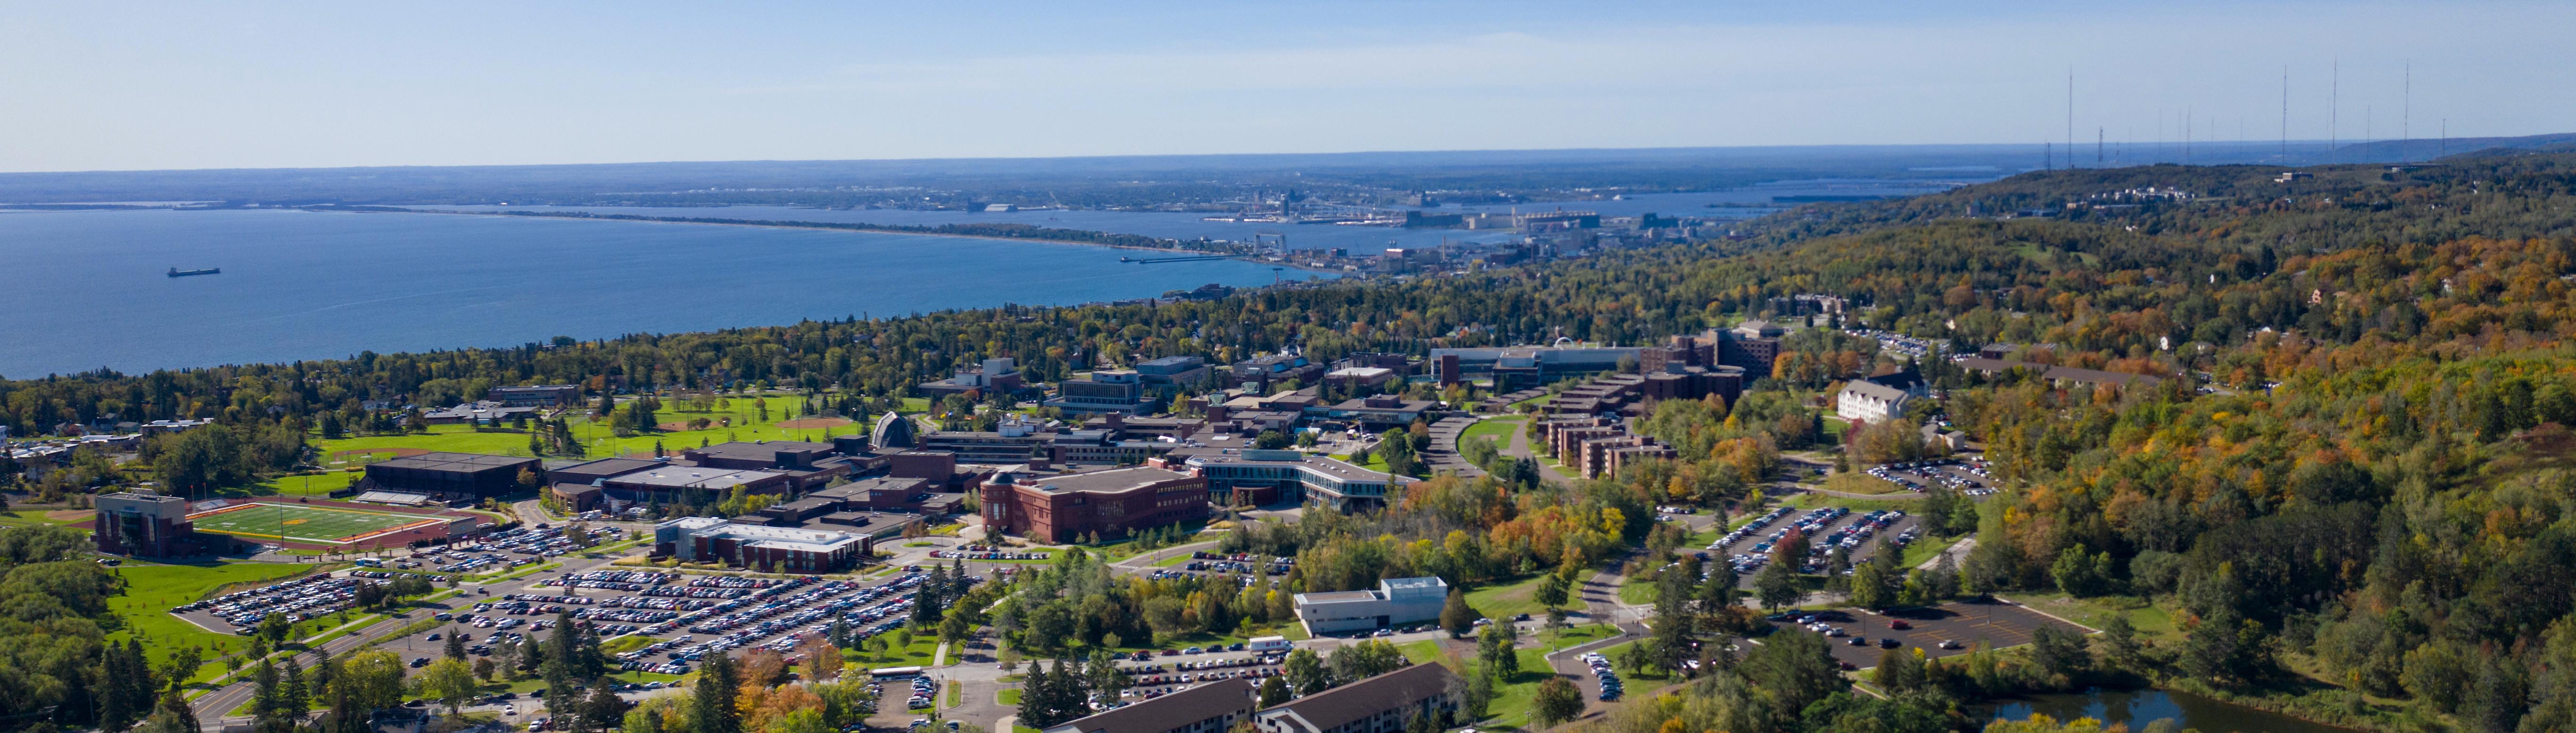 CAmpus photo from drone overlooking lake superior